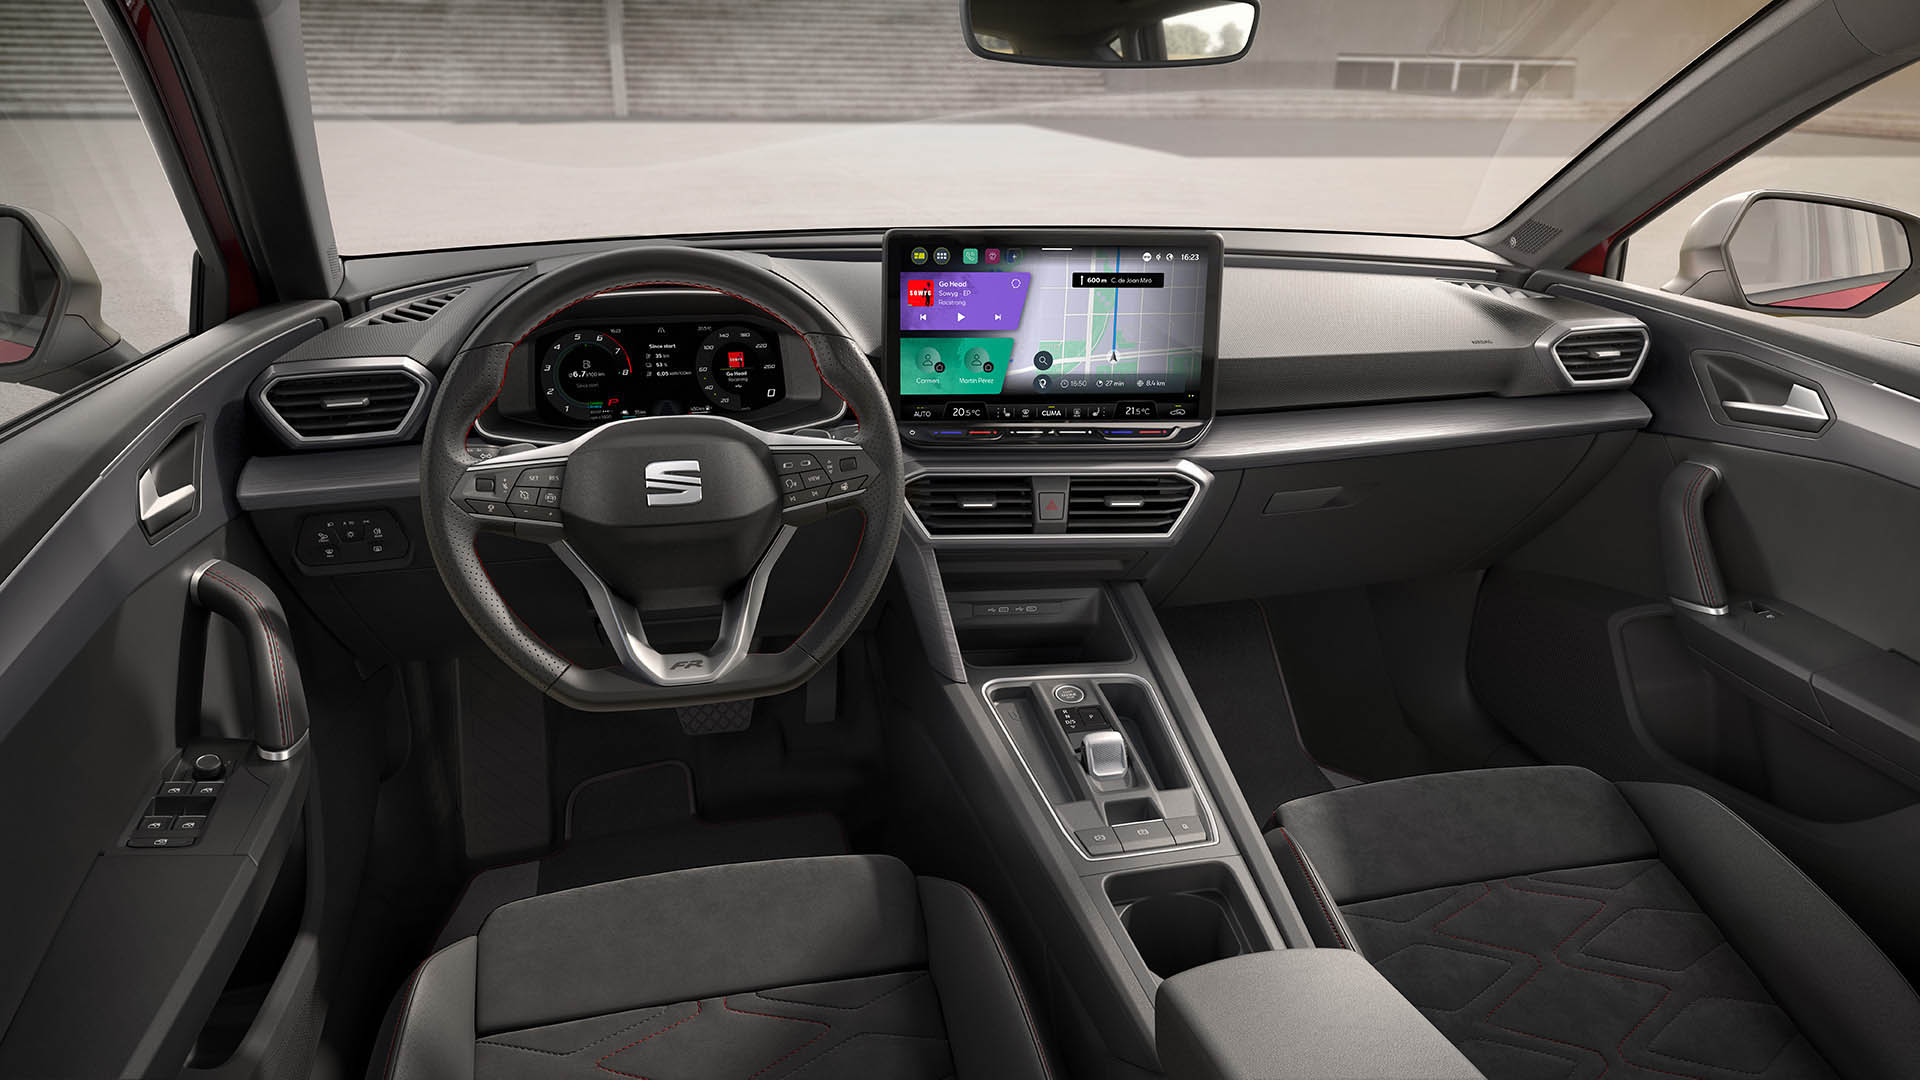 New-engines-and-improved-interior-for-the-upgraded-SEAT-Leon_03_HQa